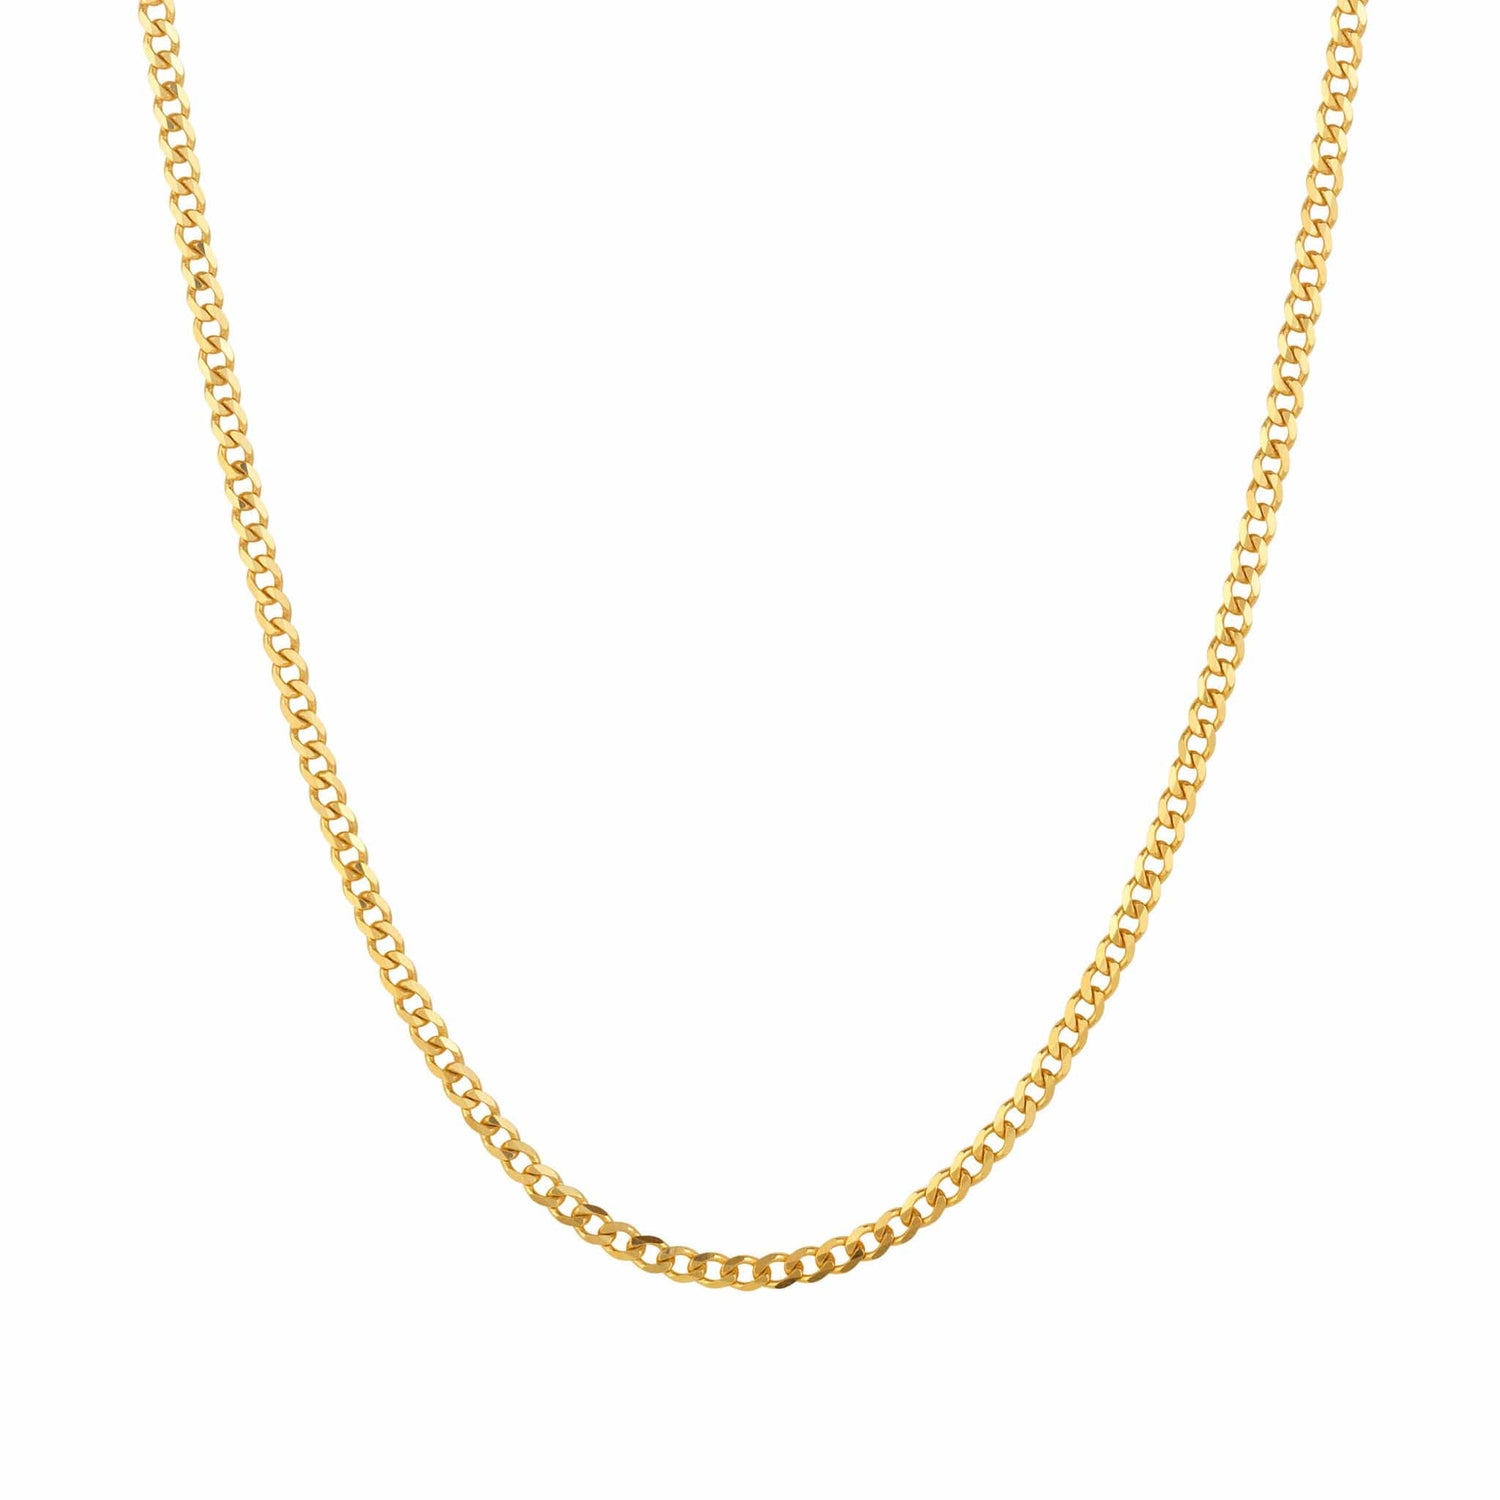 A dainty gold anklet displayed against a white background.